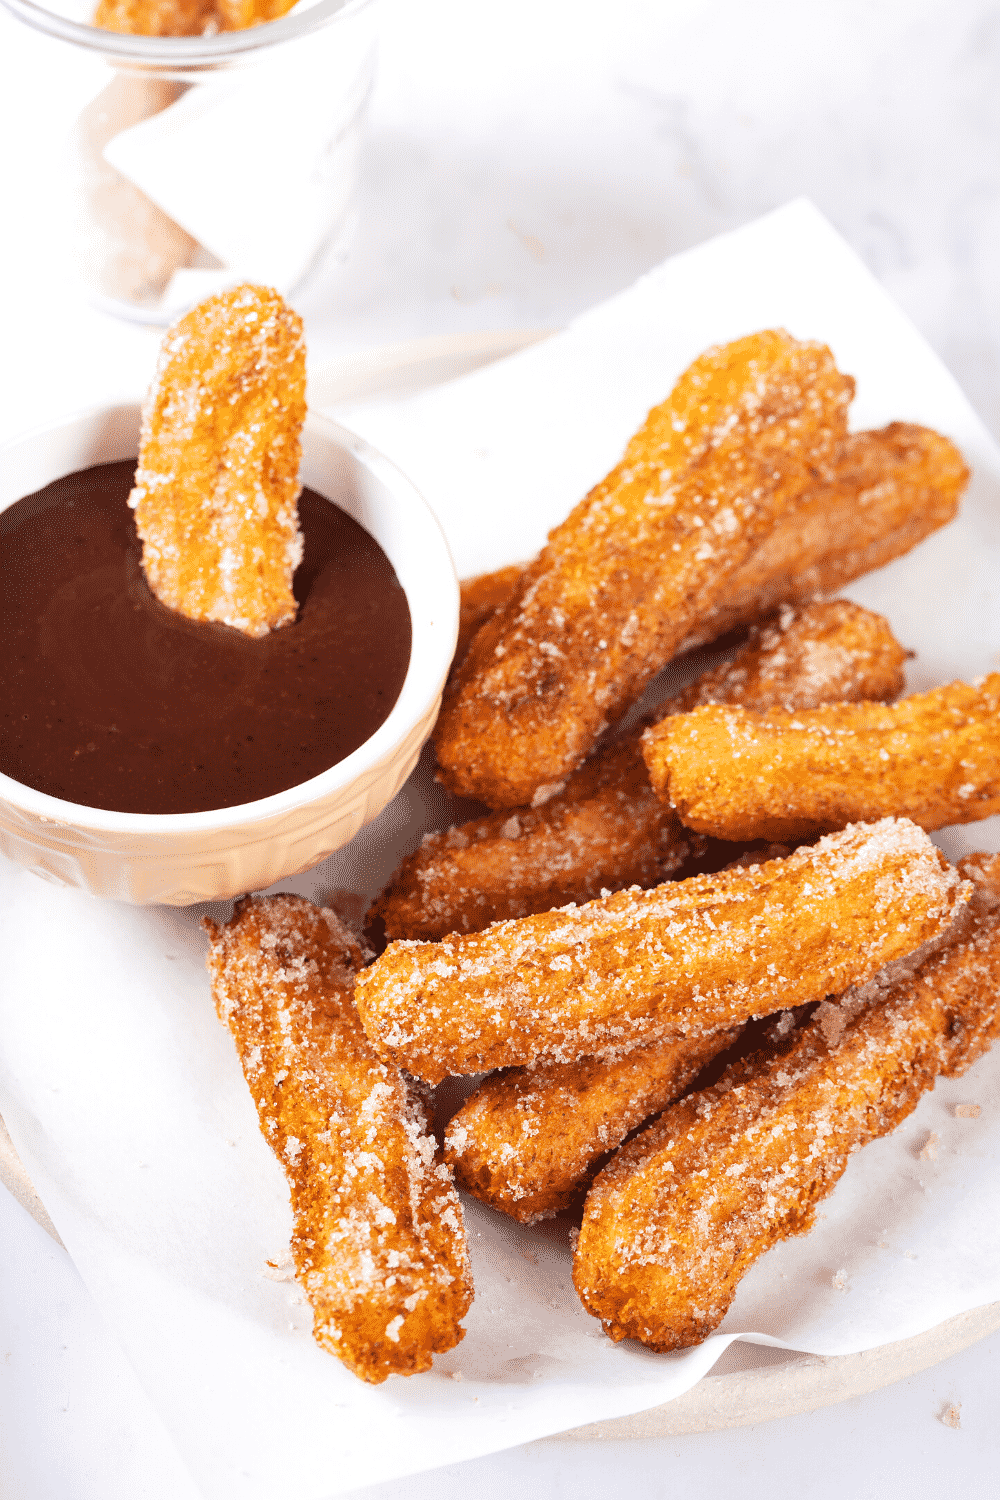 A bunch of churros and a piece of white parchment paper on a plate. There is a small cup of chocolate sauce to the left on the churros on the plate.